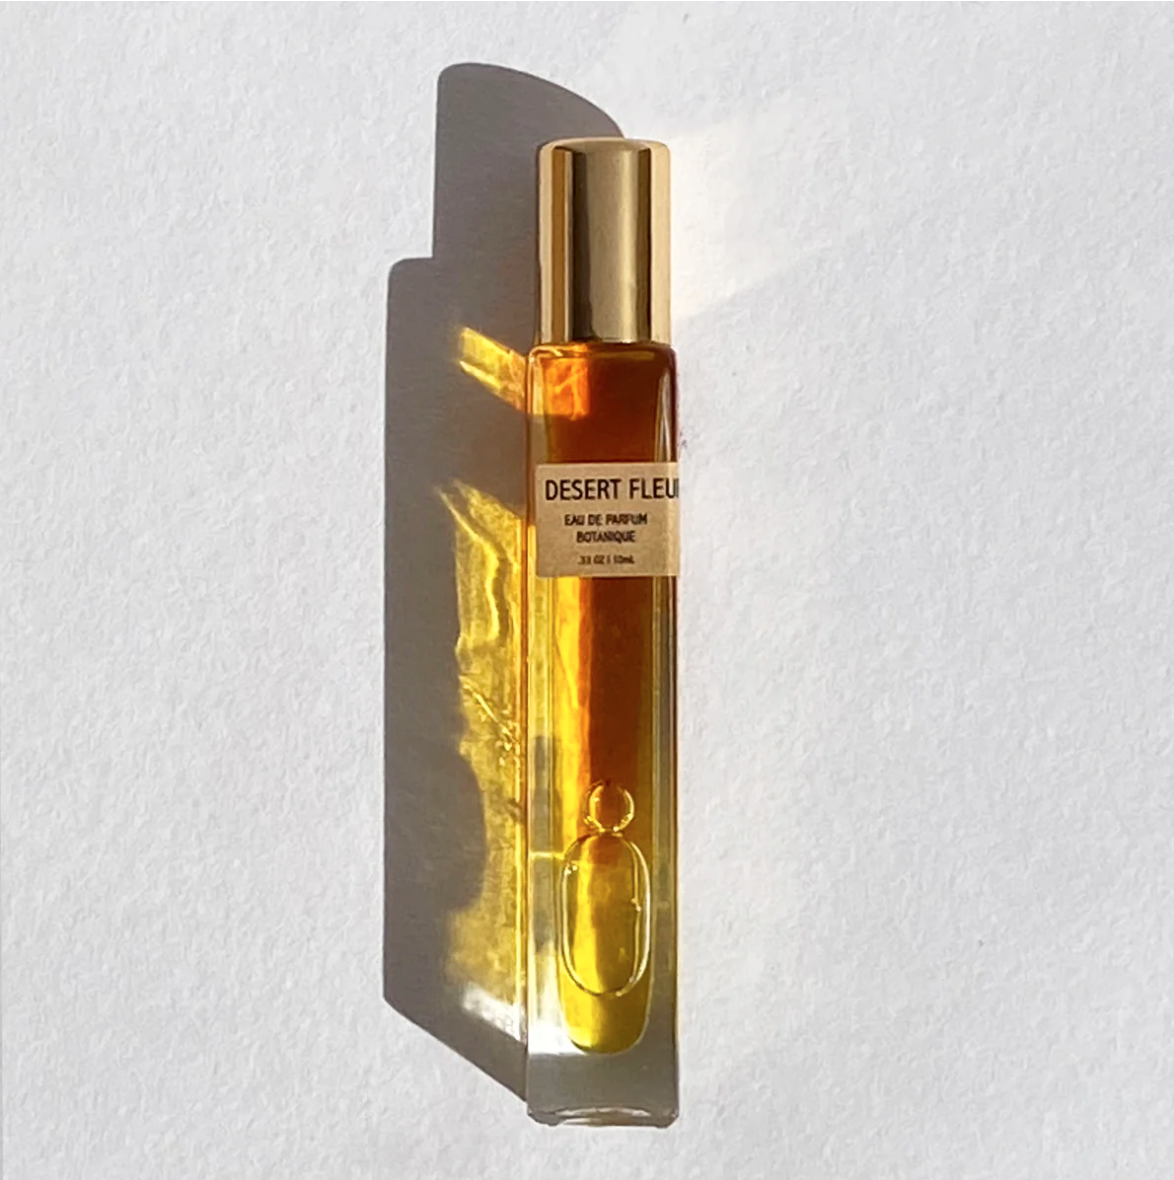 A bottle of "Desert Fleur Parfum" by Faire against a white background, photographed in a Scottsdale Arizona bungalow, with sunlight casting sharp shadows to the left. The perfume liquid is amber-colored.